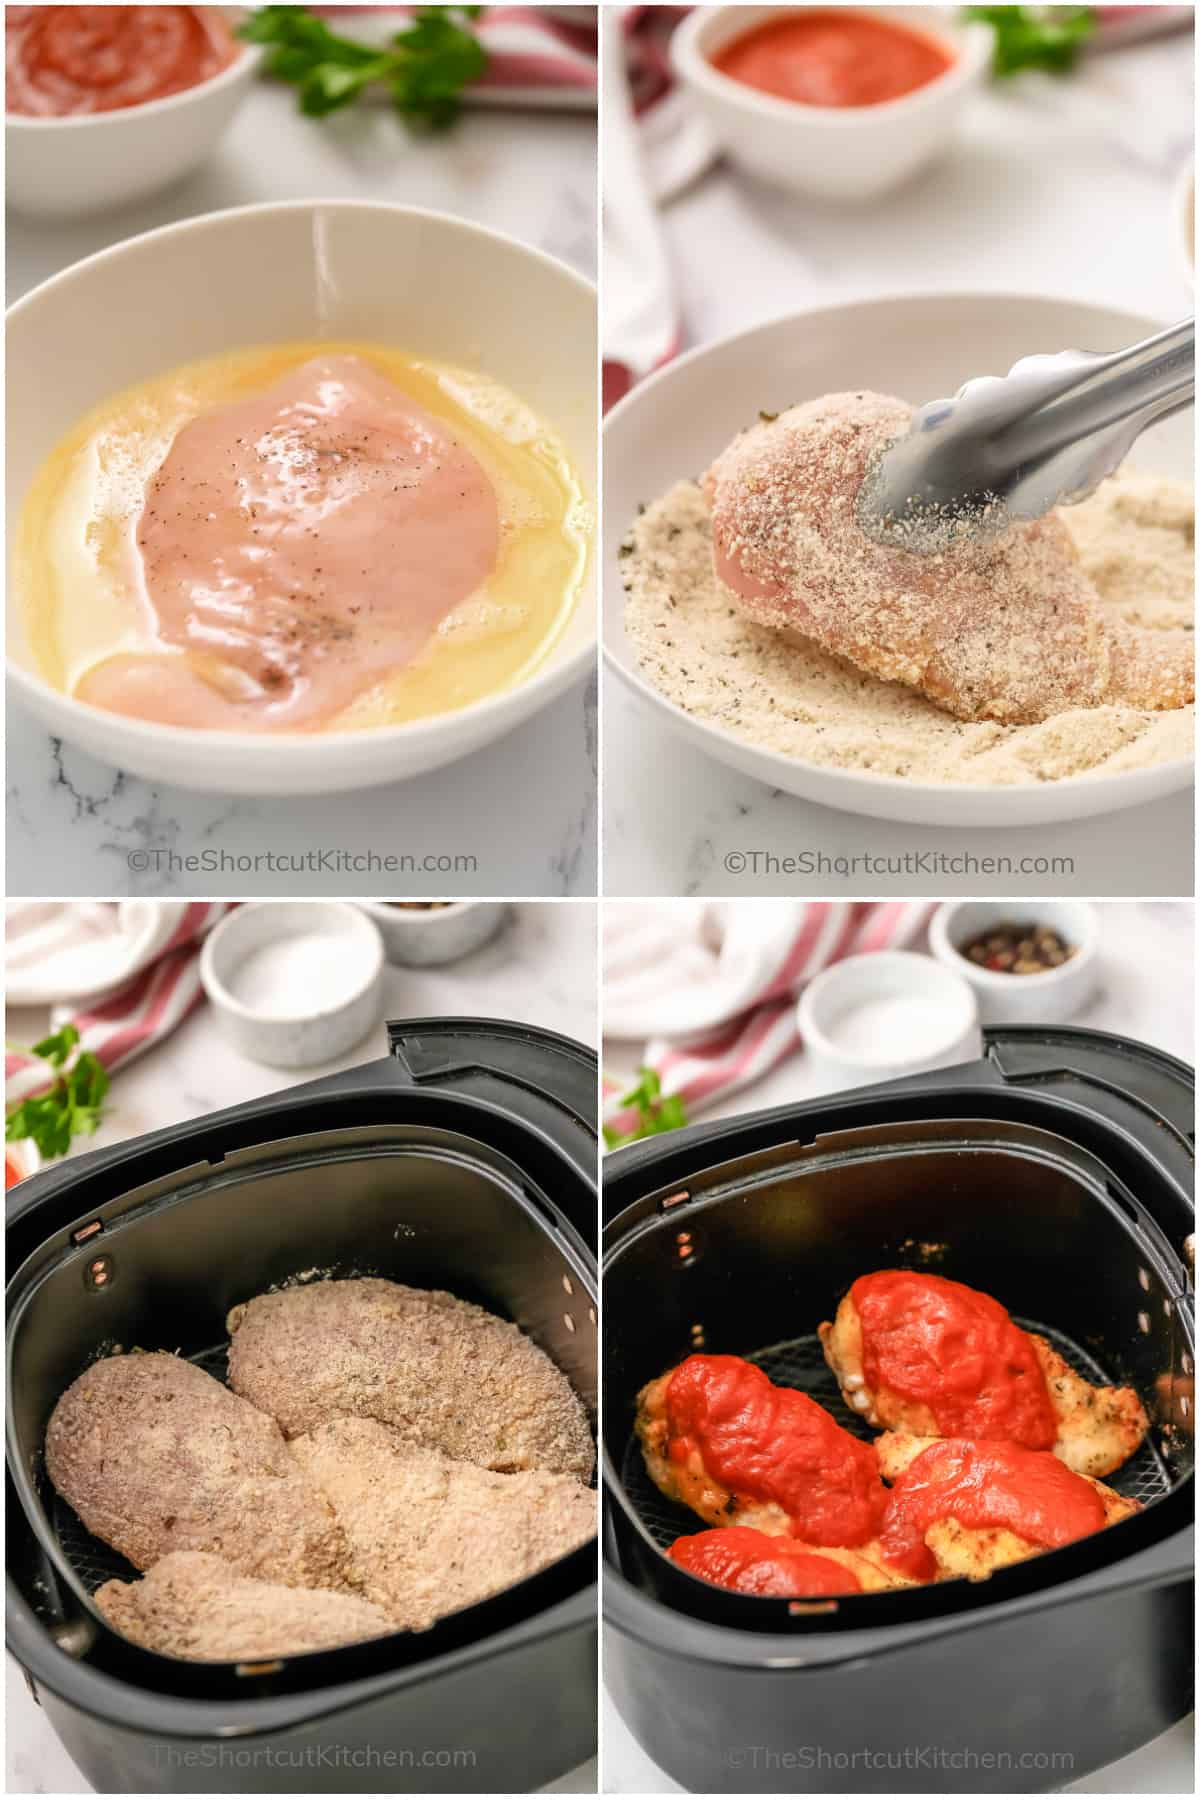 process to dredge and cook Air Fryer Parmesan Chicken